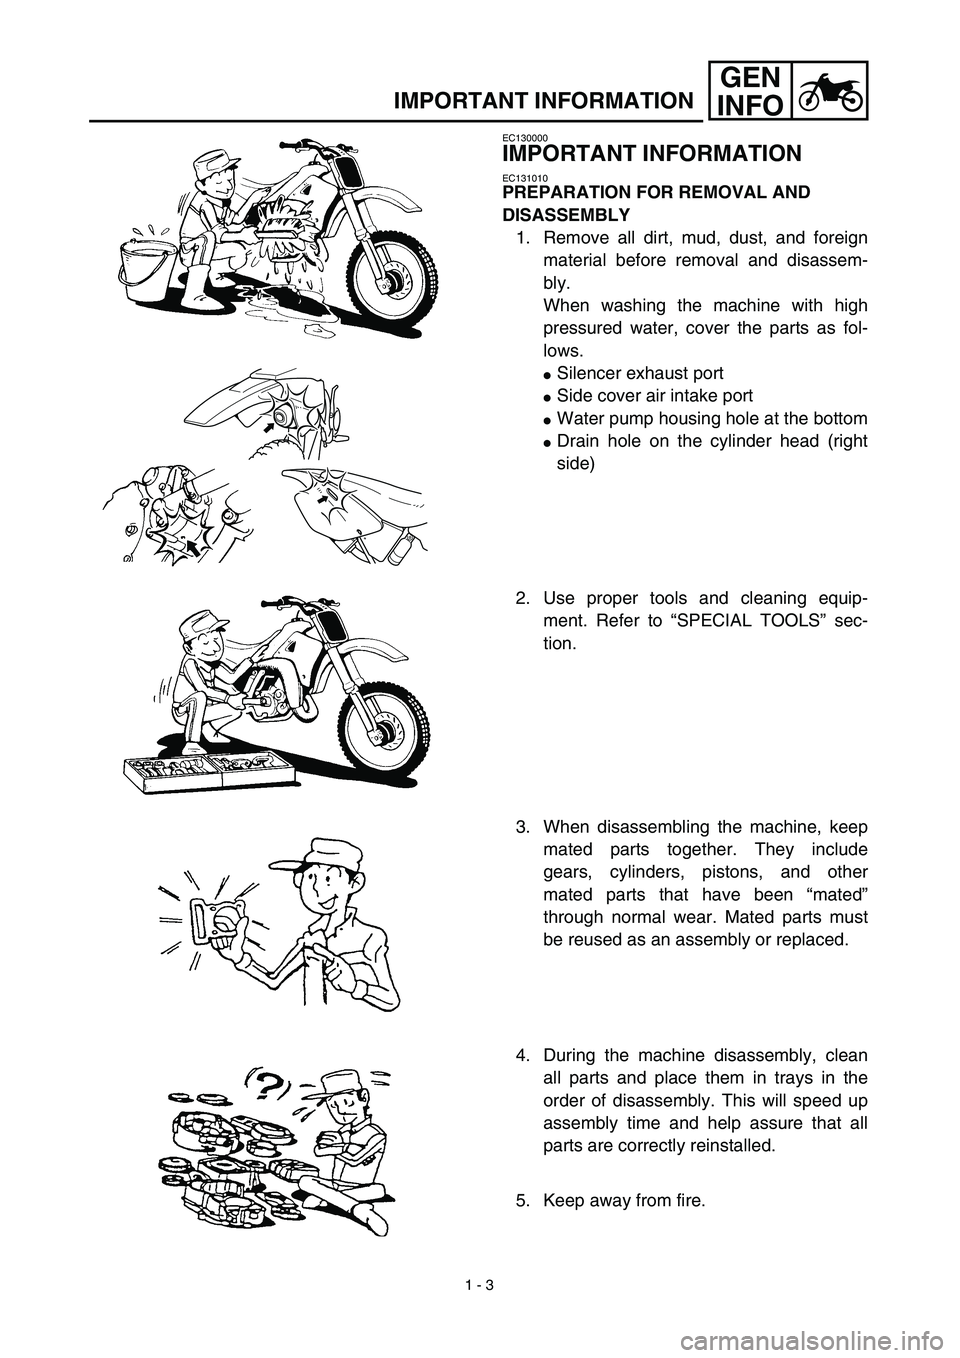 YAMAHA YZ450F 2003 Owners Manual  
1 - 3
GEN
INFO
 
IMPORTANT INFORMATION 
EC130000 
IMPORTANT INFORMATION 
EC131010 
PREPARATION FOR REMOVAL AND 
DISASSEMBLY 
1. Remove all dirt, mud, dust, and foreign
material before removal and di